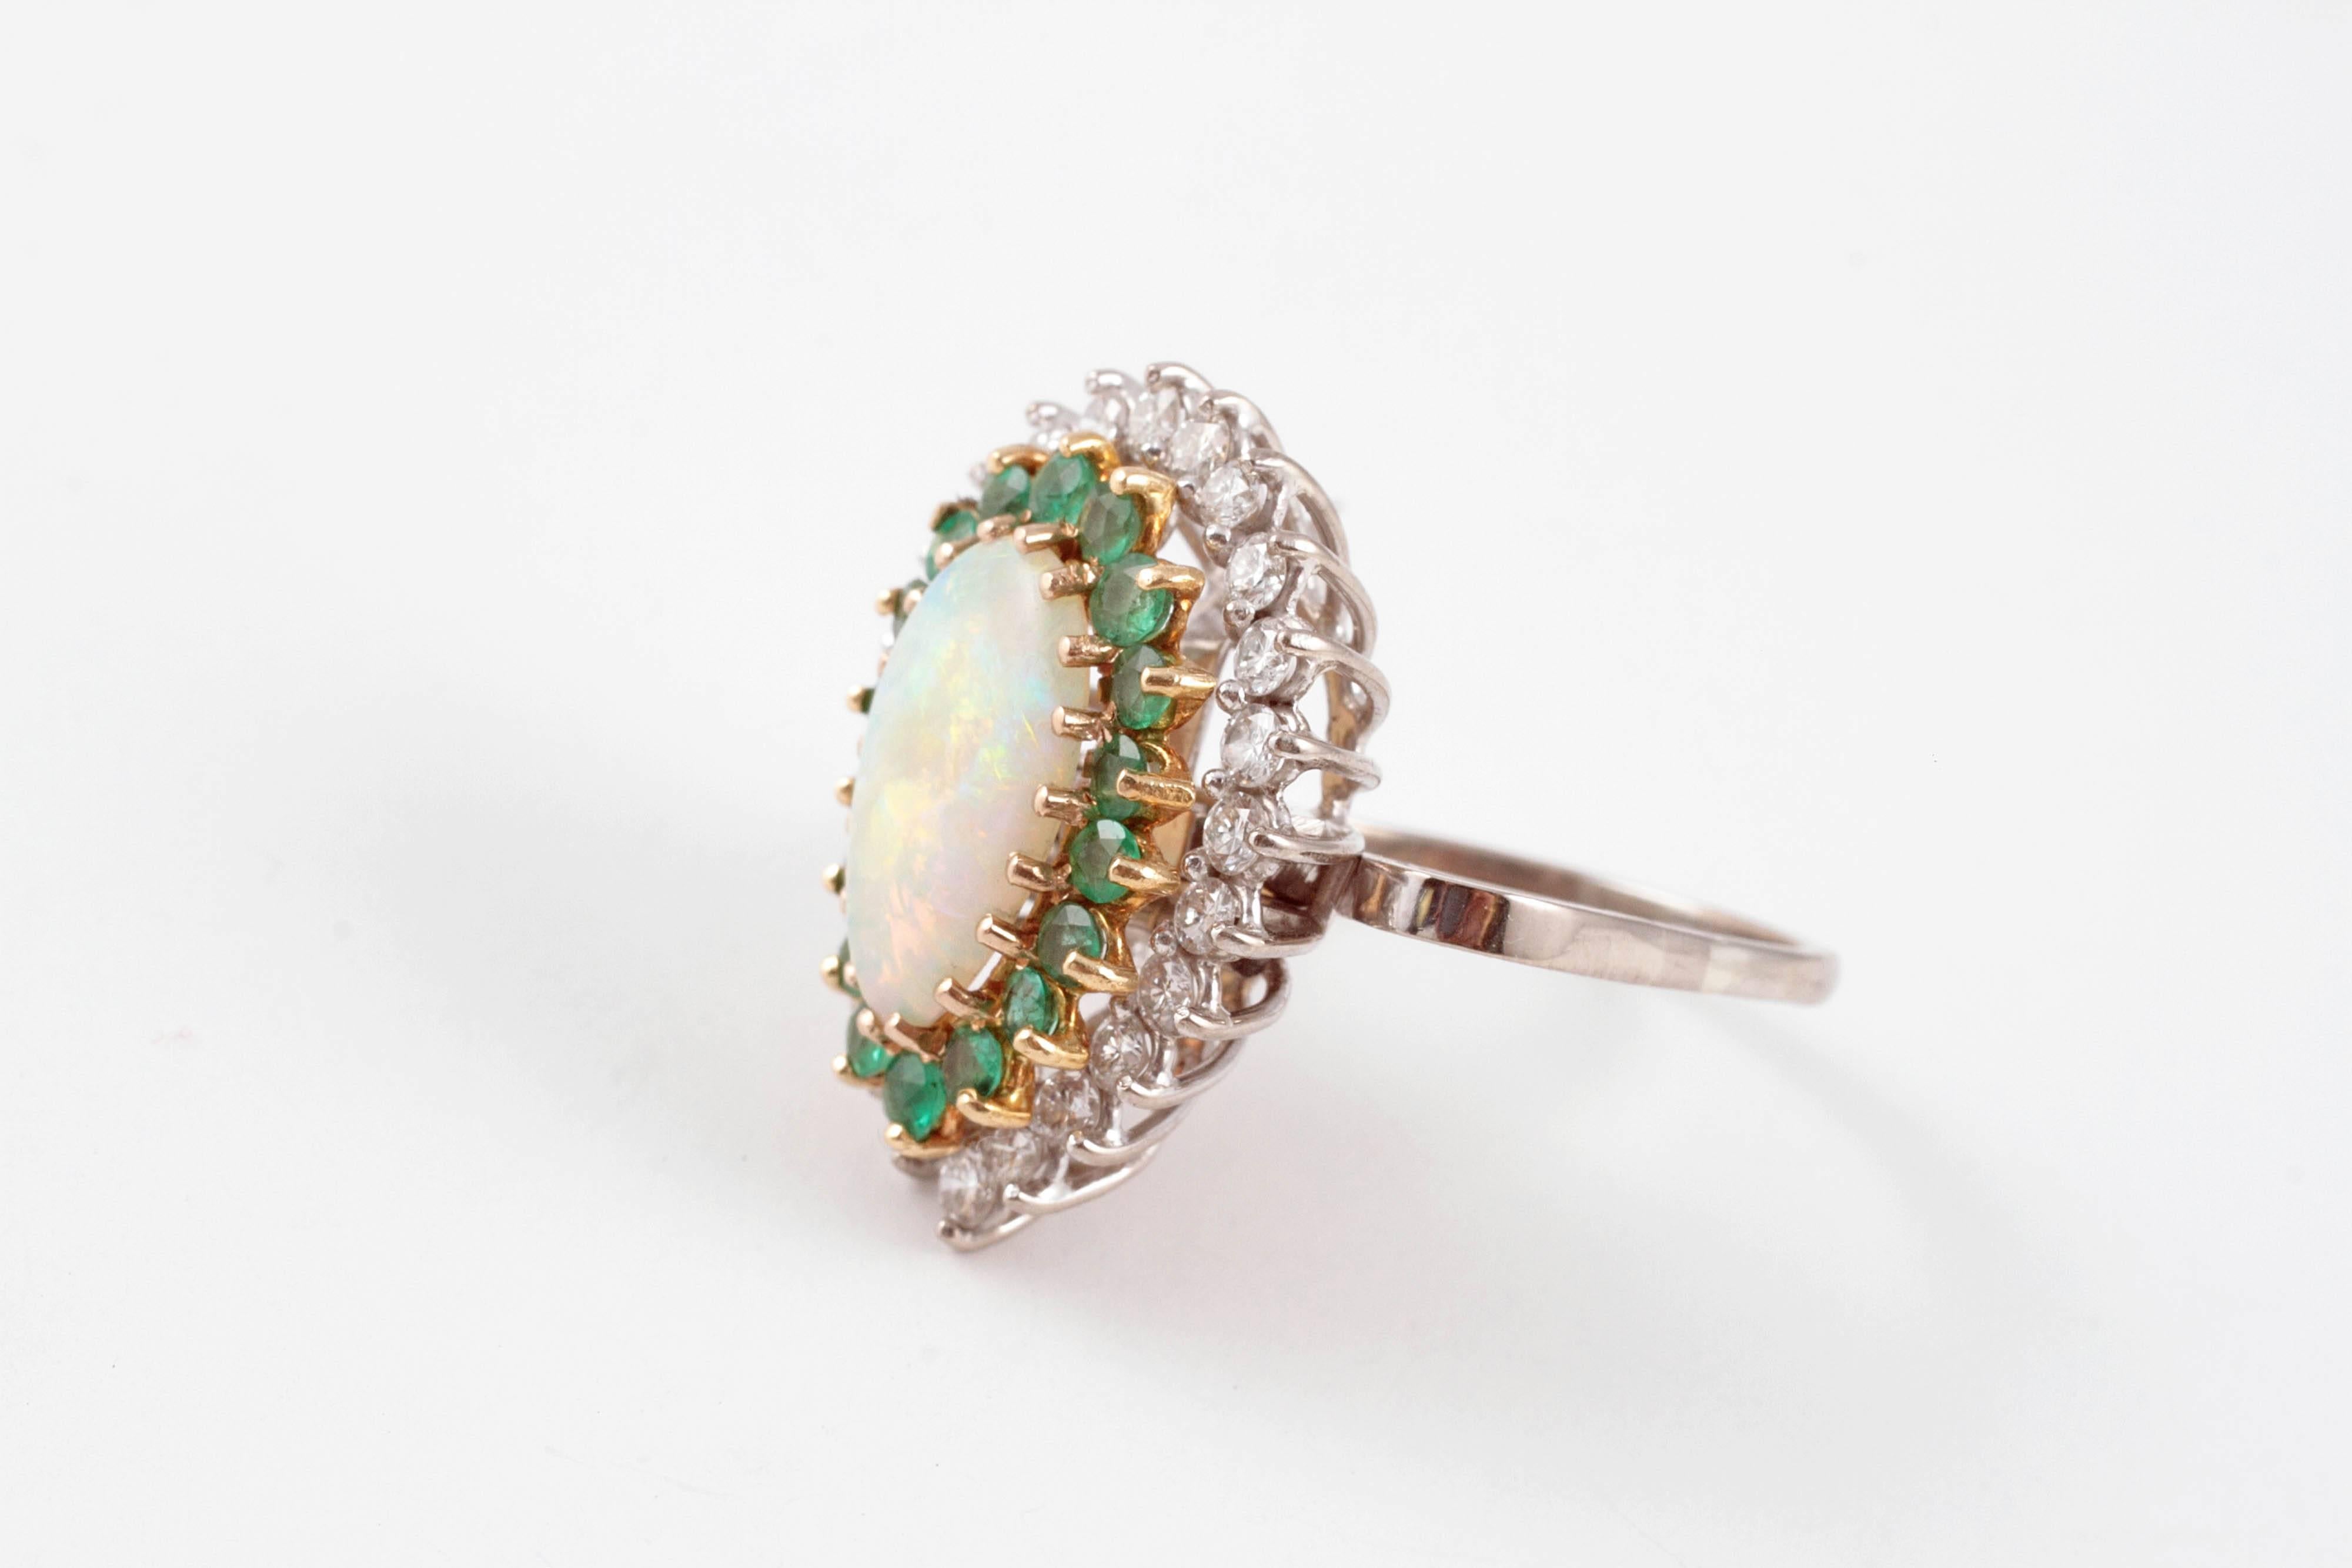 This lovely ring can be worn as a pendant too!  In 18 karat white gold, with a beautiful pear-shaped opal, surrounded by one row of emeralds and one row of diamonds. Size 9.